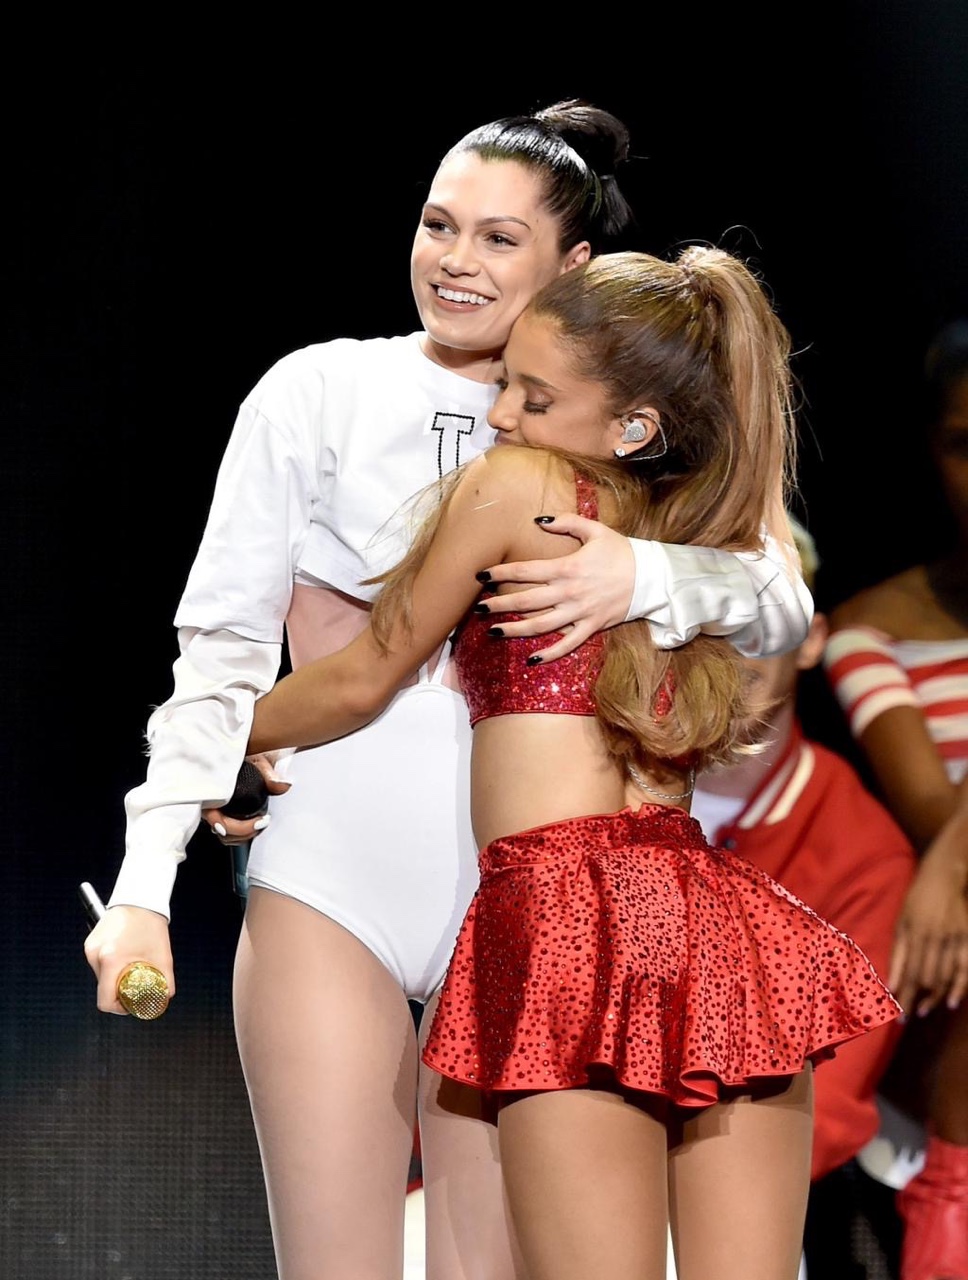  Ariana Grande and Jessie J performing on baciare FM’S Jingle Ball in Los Angeles